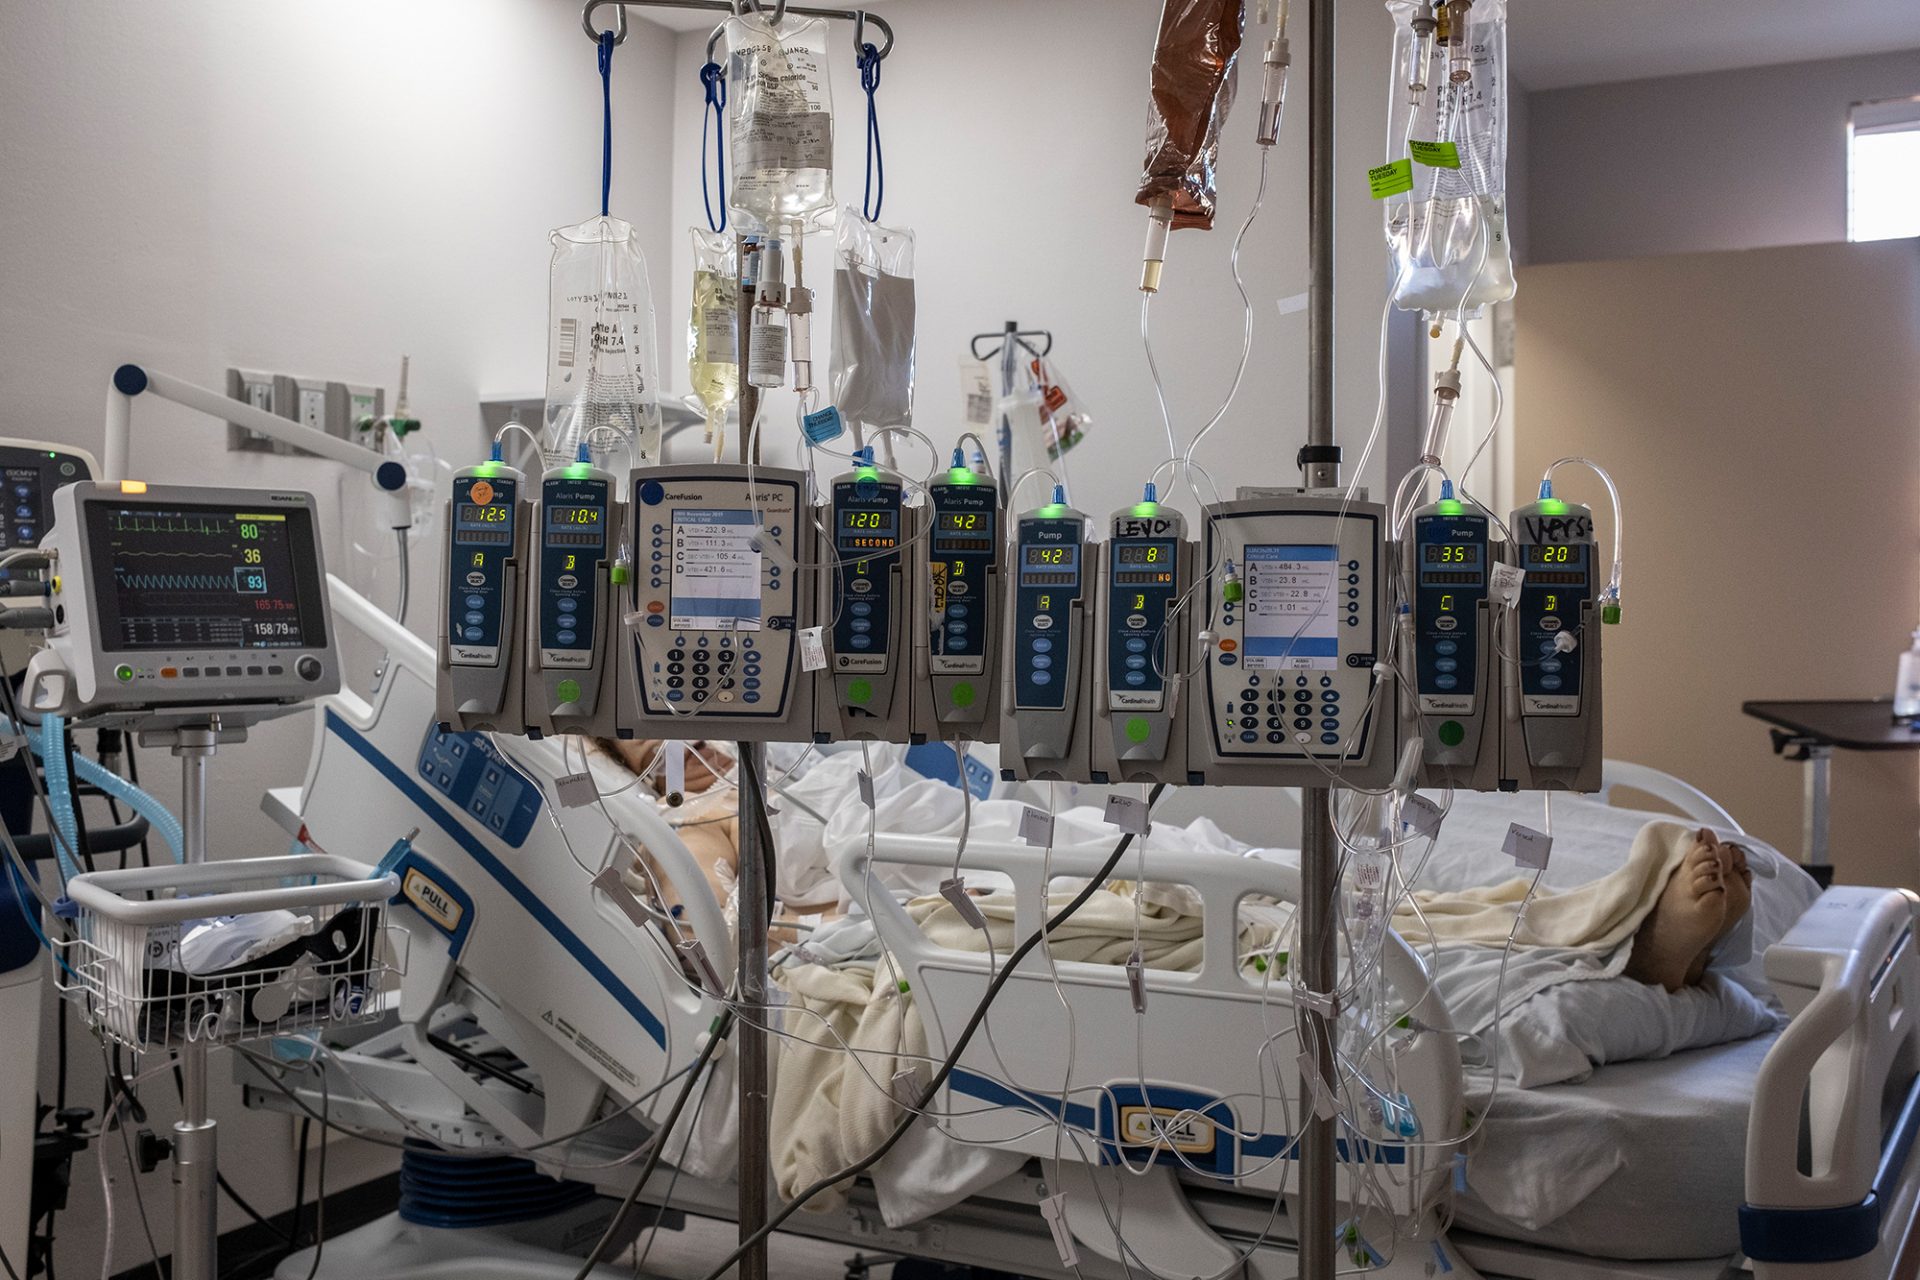 IV pumps and electrocardiogram machines are seen in a patient's room in the COVID-19 intensive care unit at the United Memorial Medical Center on Dec. 7 in Houston.